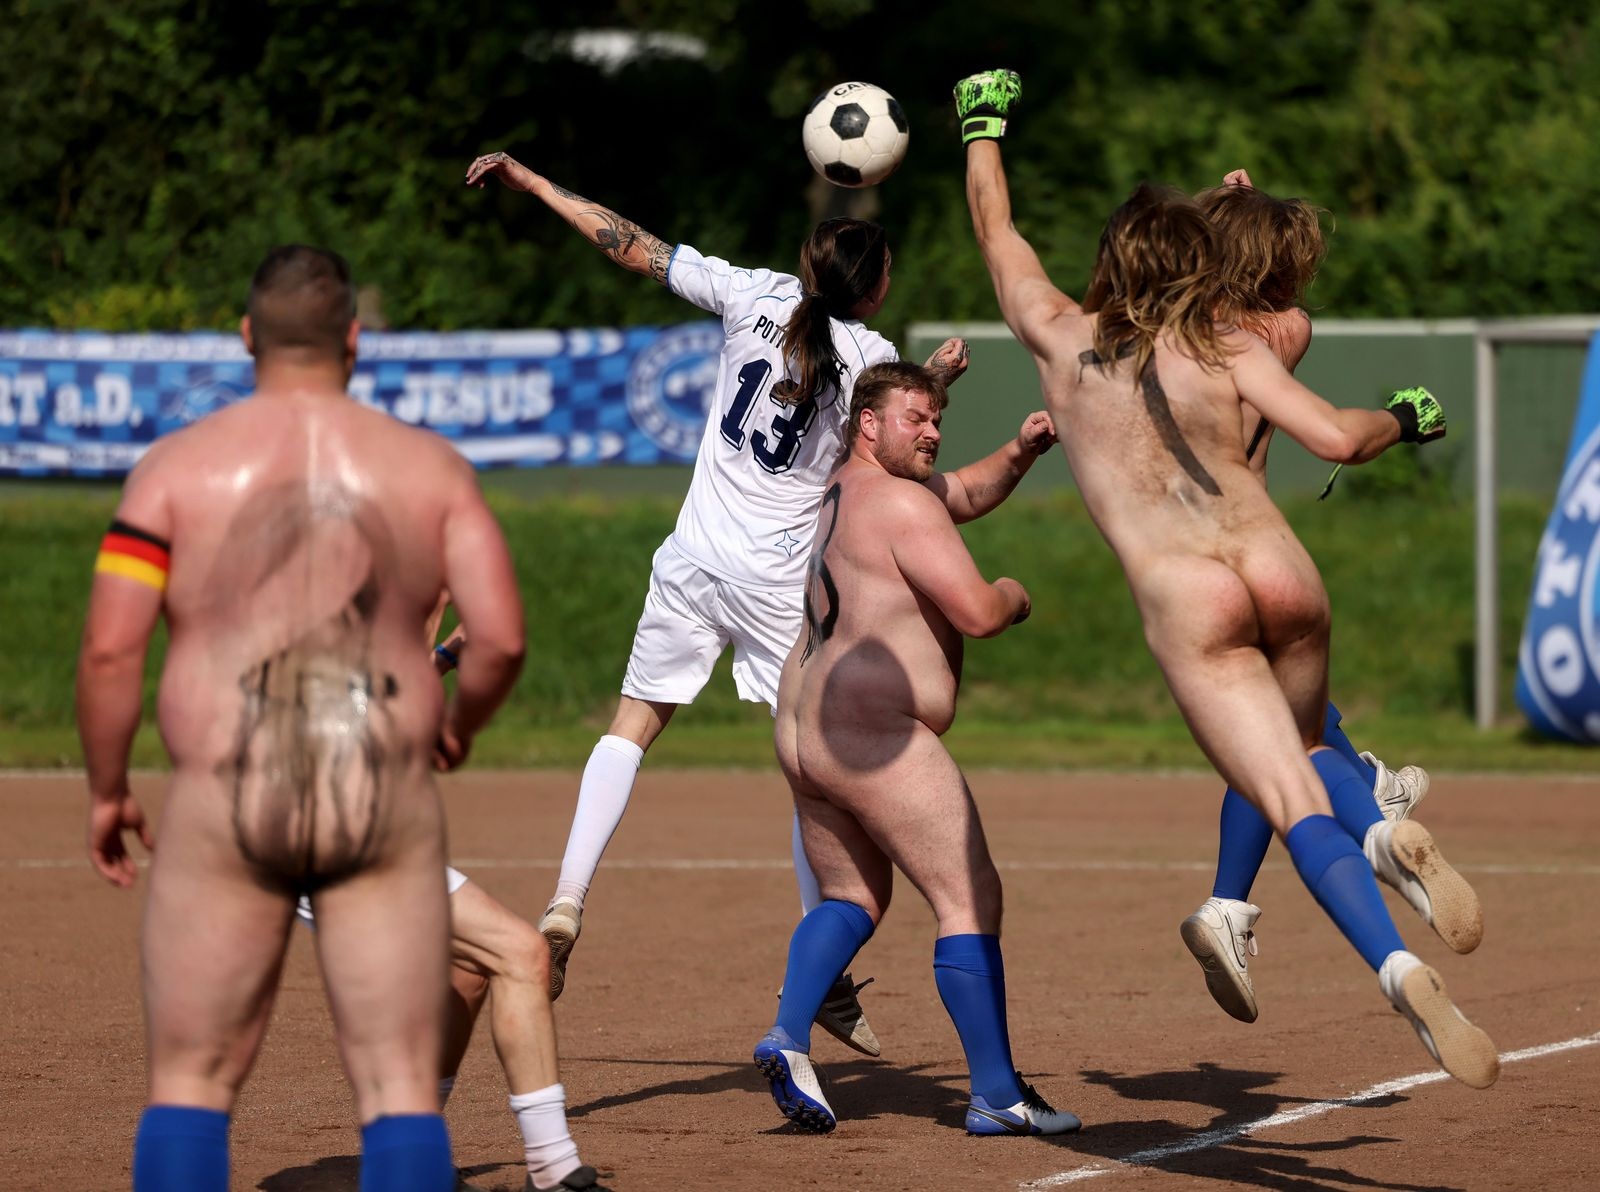 Naked women playing soccer